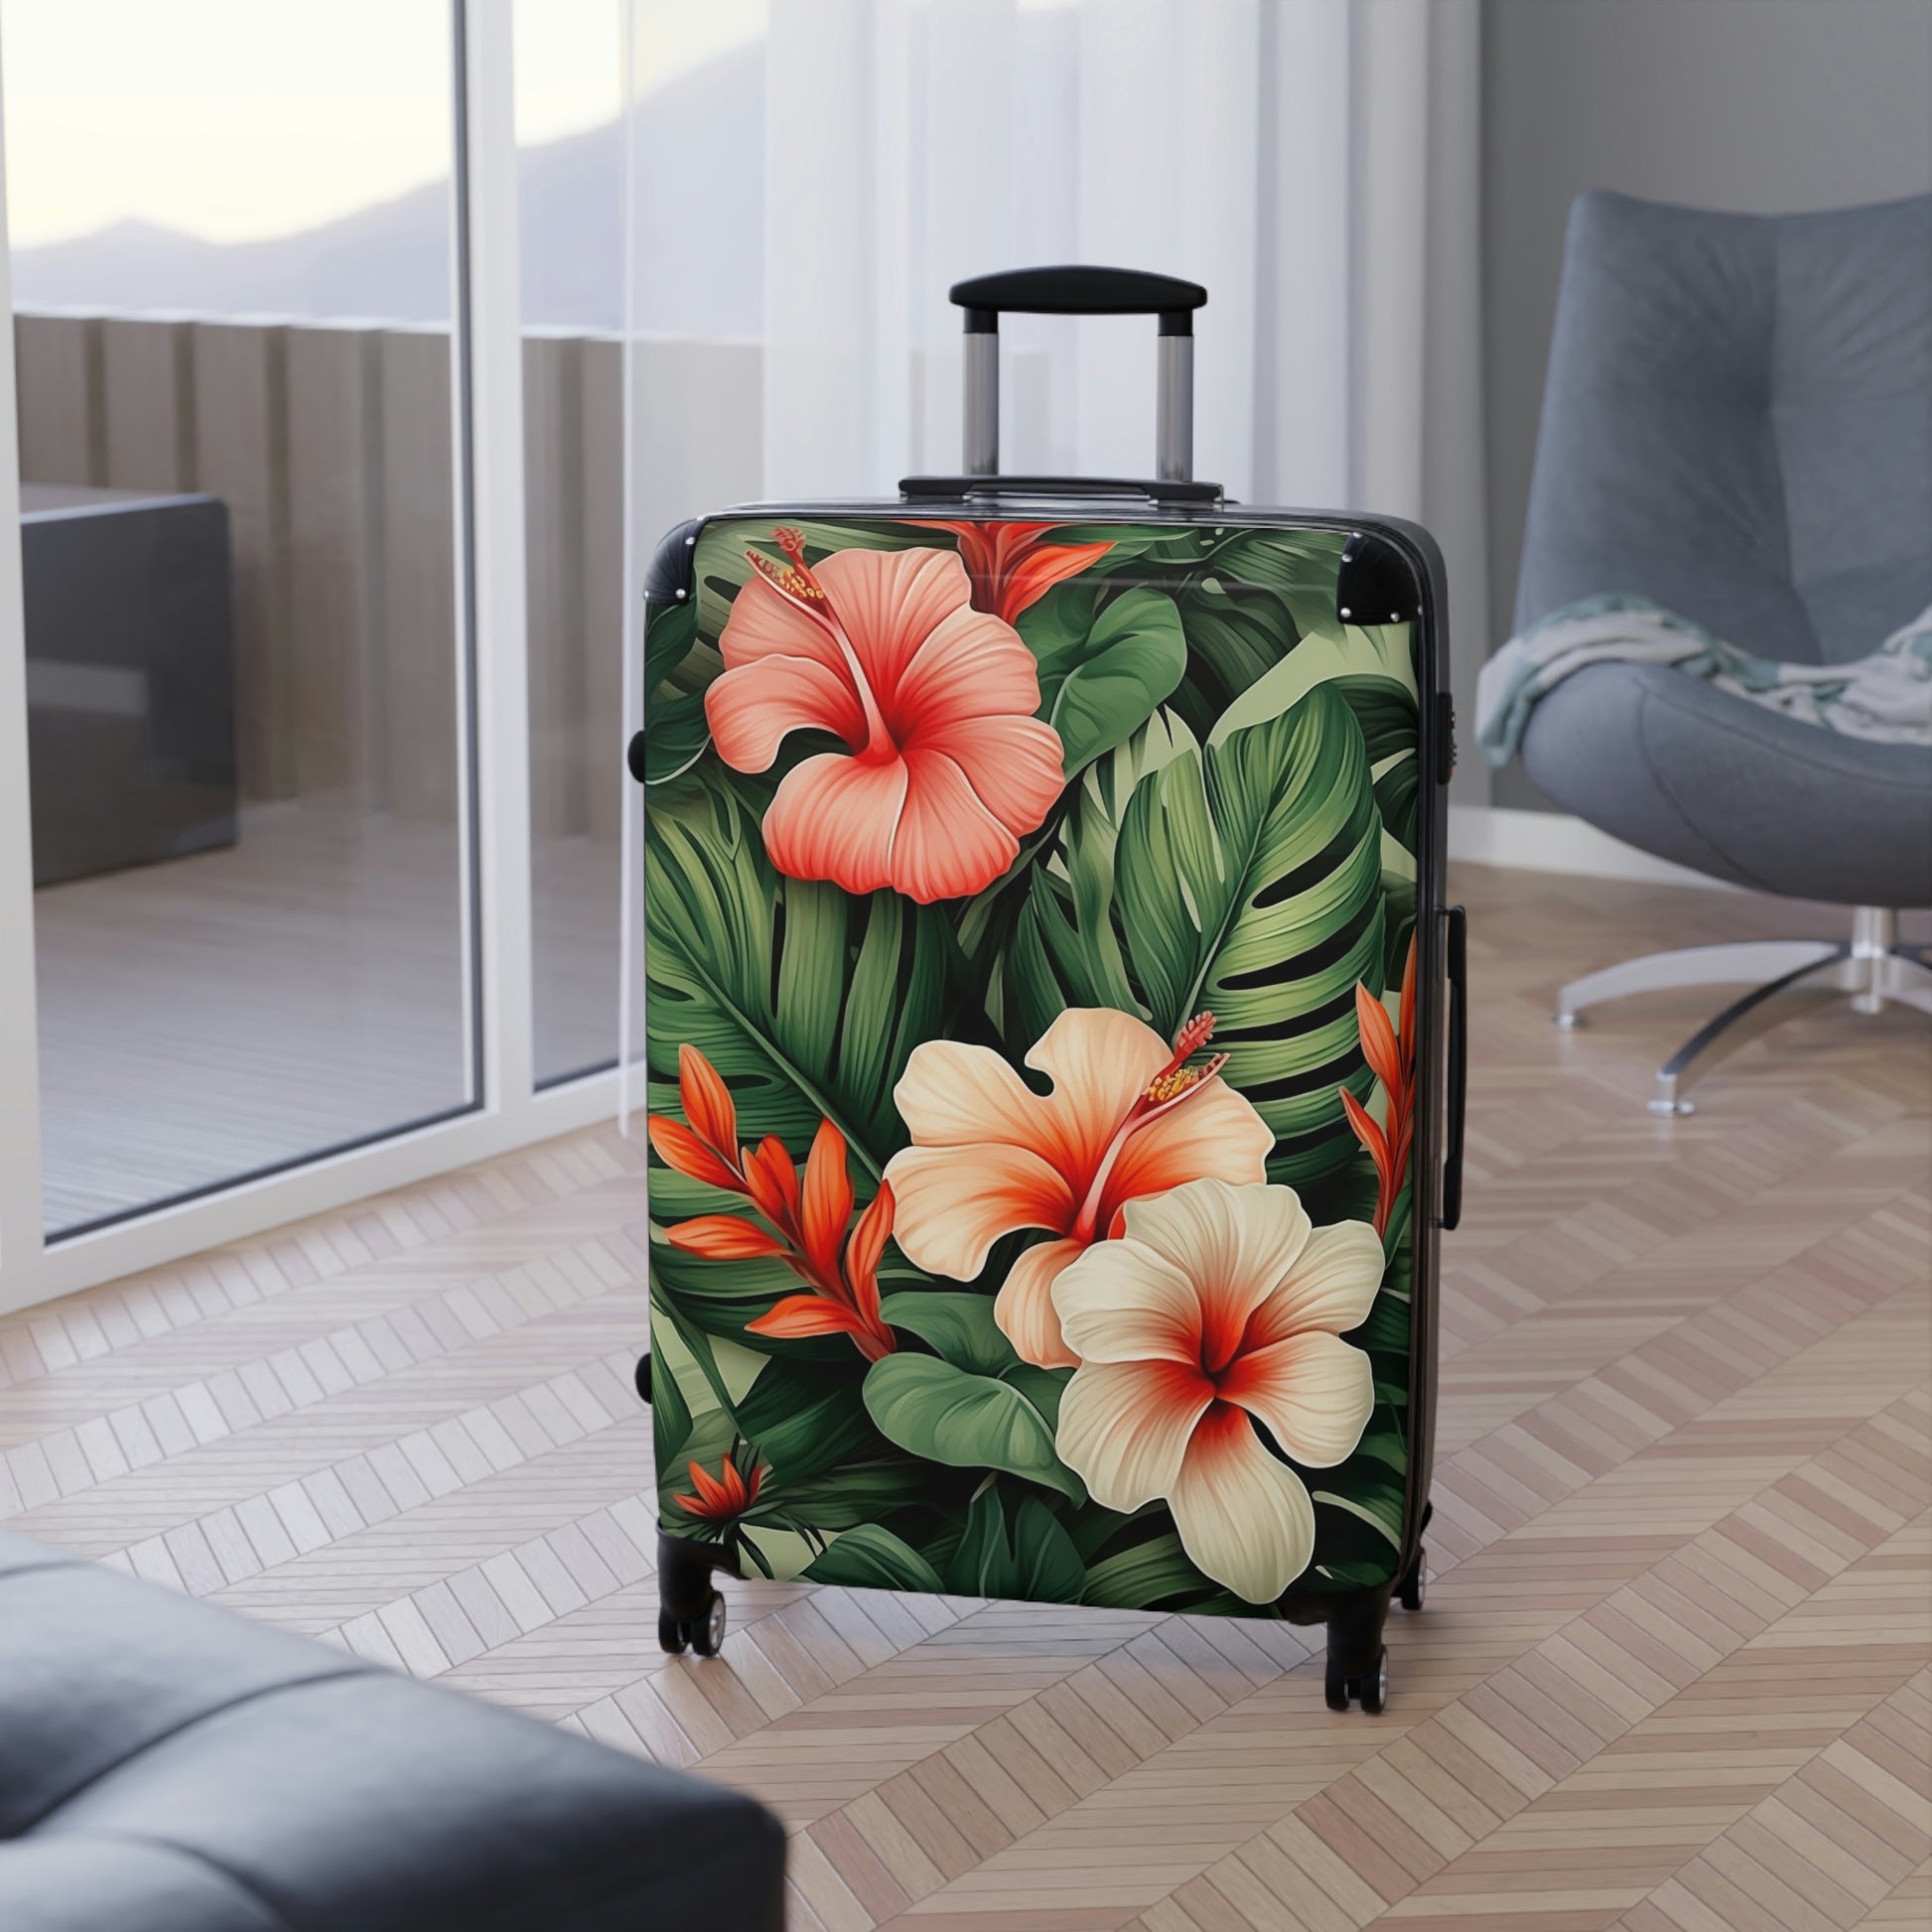 Tropical Suitcase Luggage, Flowers Floral Carry On With 4 Wheels Cabin Travel Small Large Set Rolling Spinner Designer Hard Shell Case Starcove Fashion